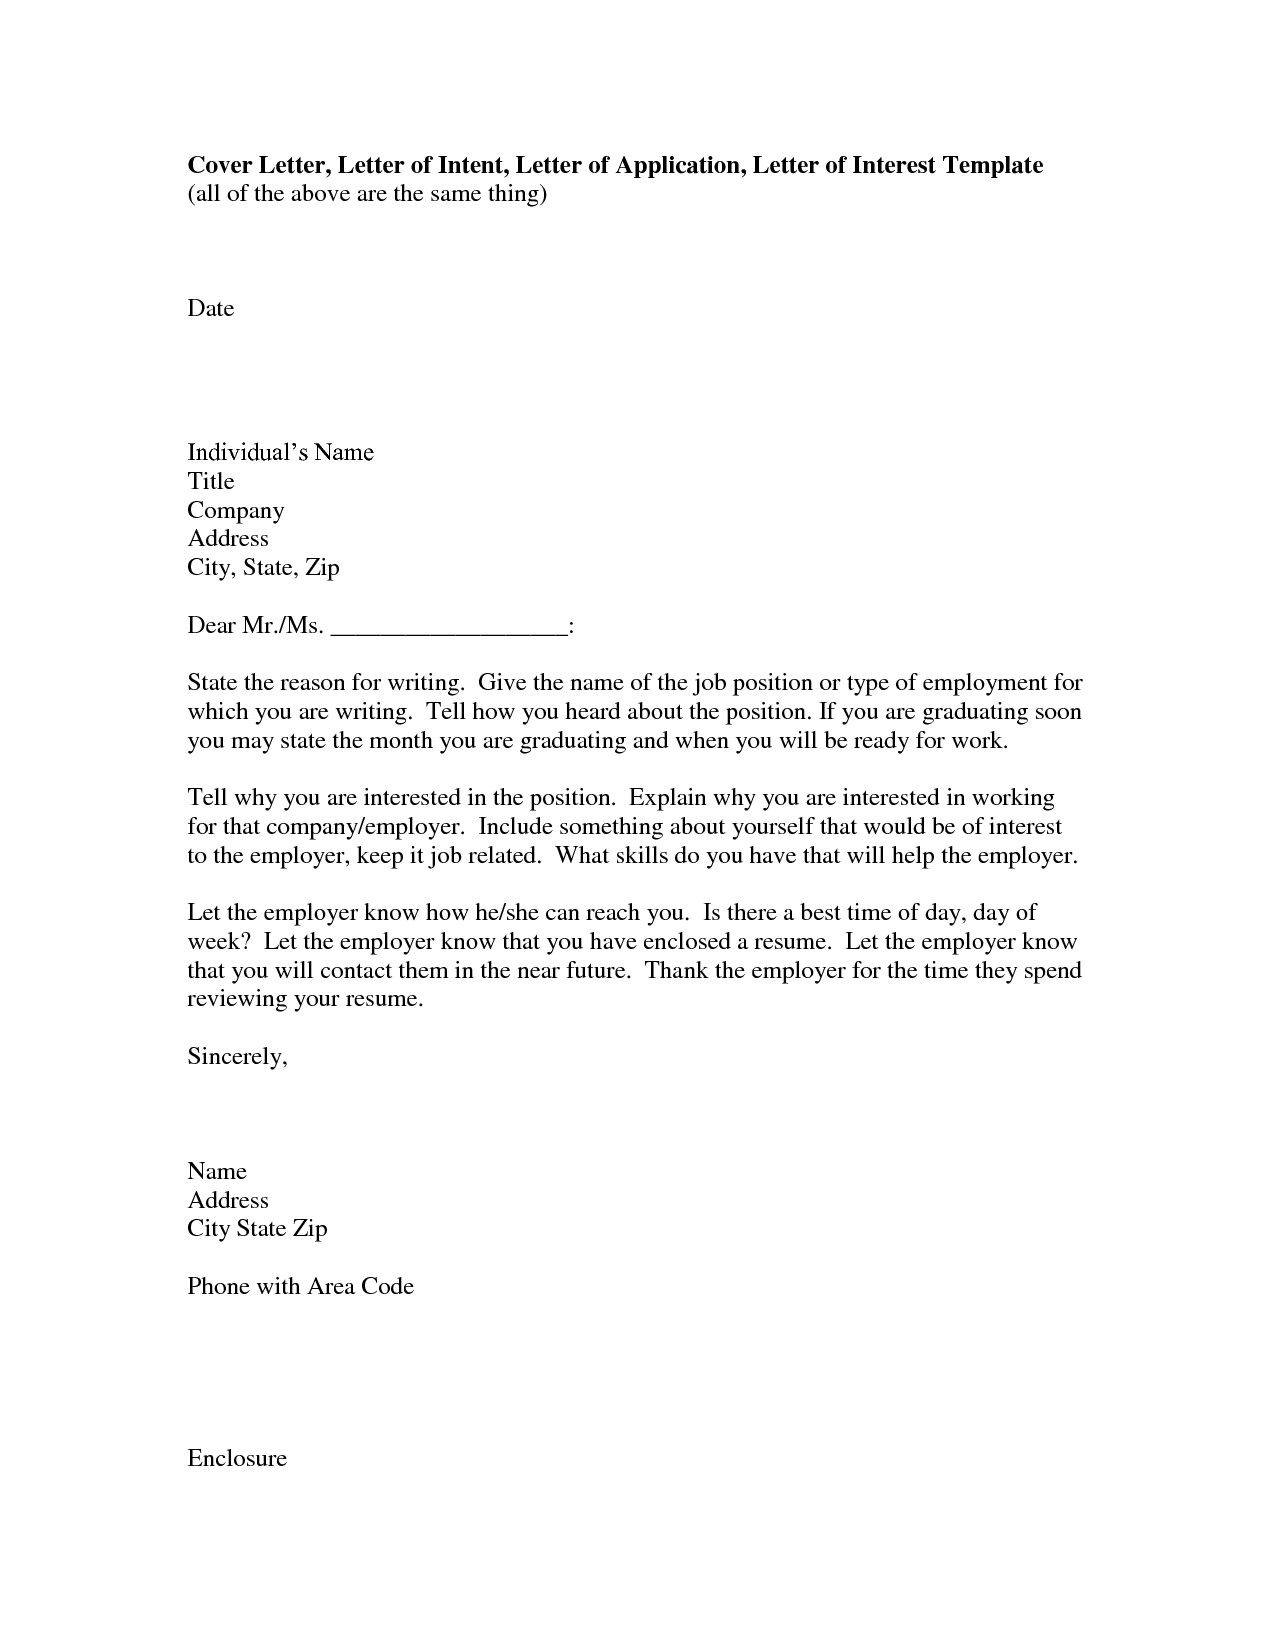 Openoffice Cover Letter Template Open Fice Cover Letter Template Download